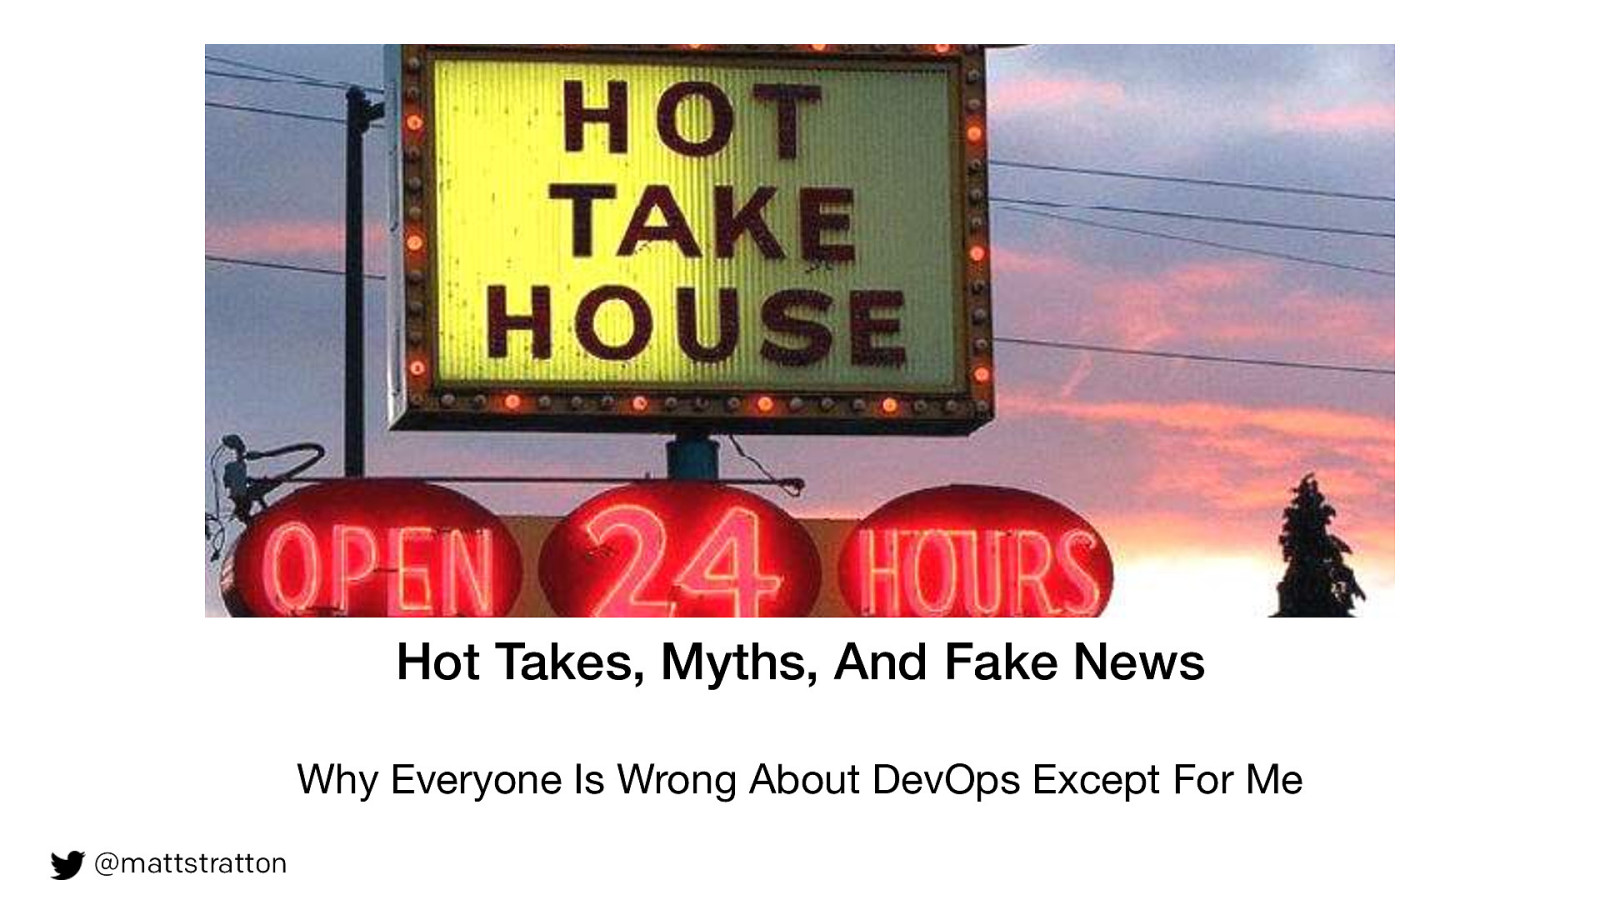 Hot Takes, Myths, And Fake News - Why Everyone Is Wrong About DevOps Except For Me